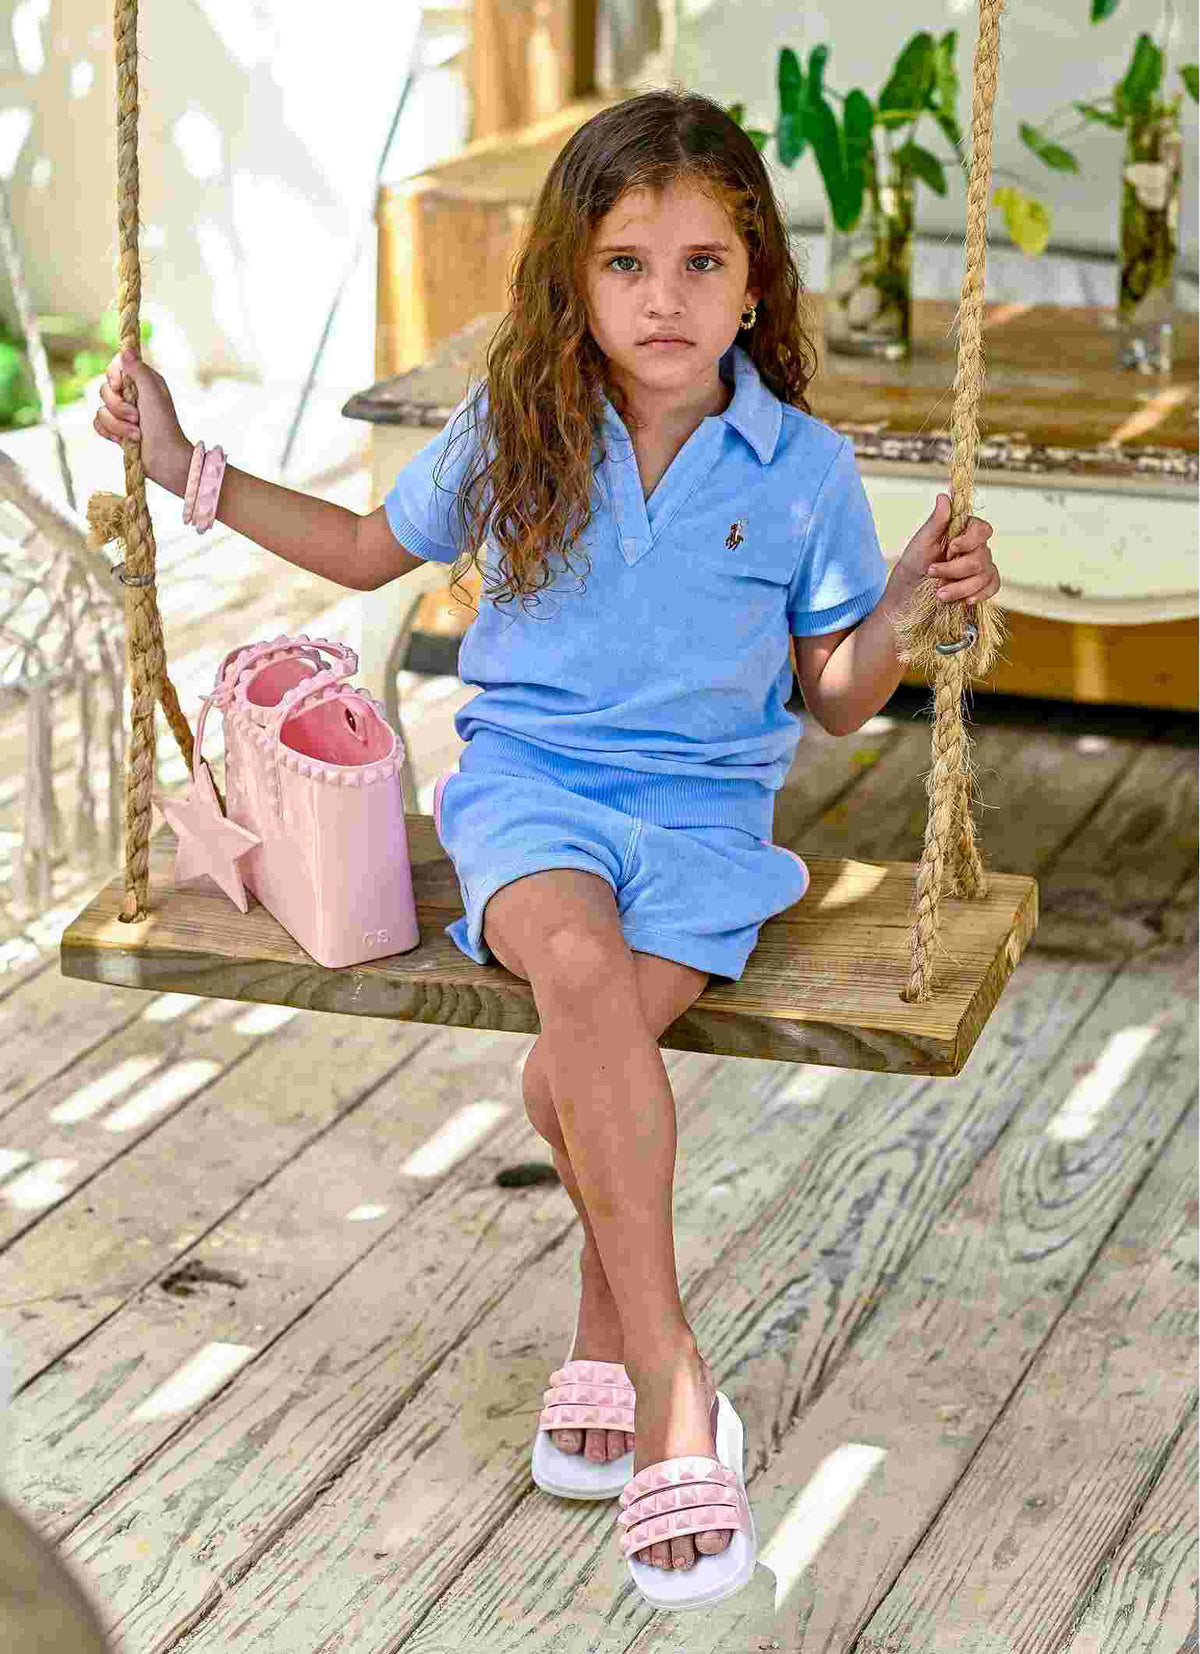 Minicarmensol kids products style with comfort, miriam micro mini tote bag, miniMelissa white sandals for kids, kids bracelets, charms.